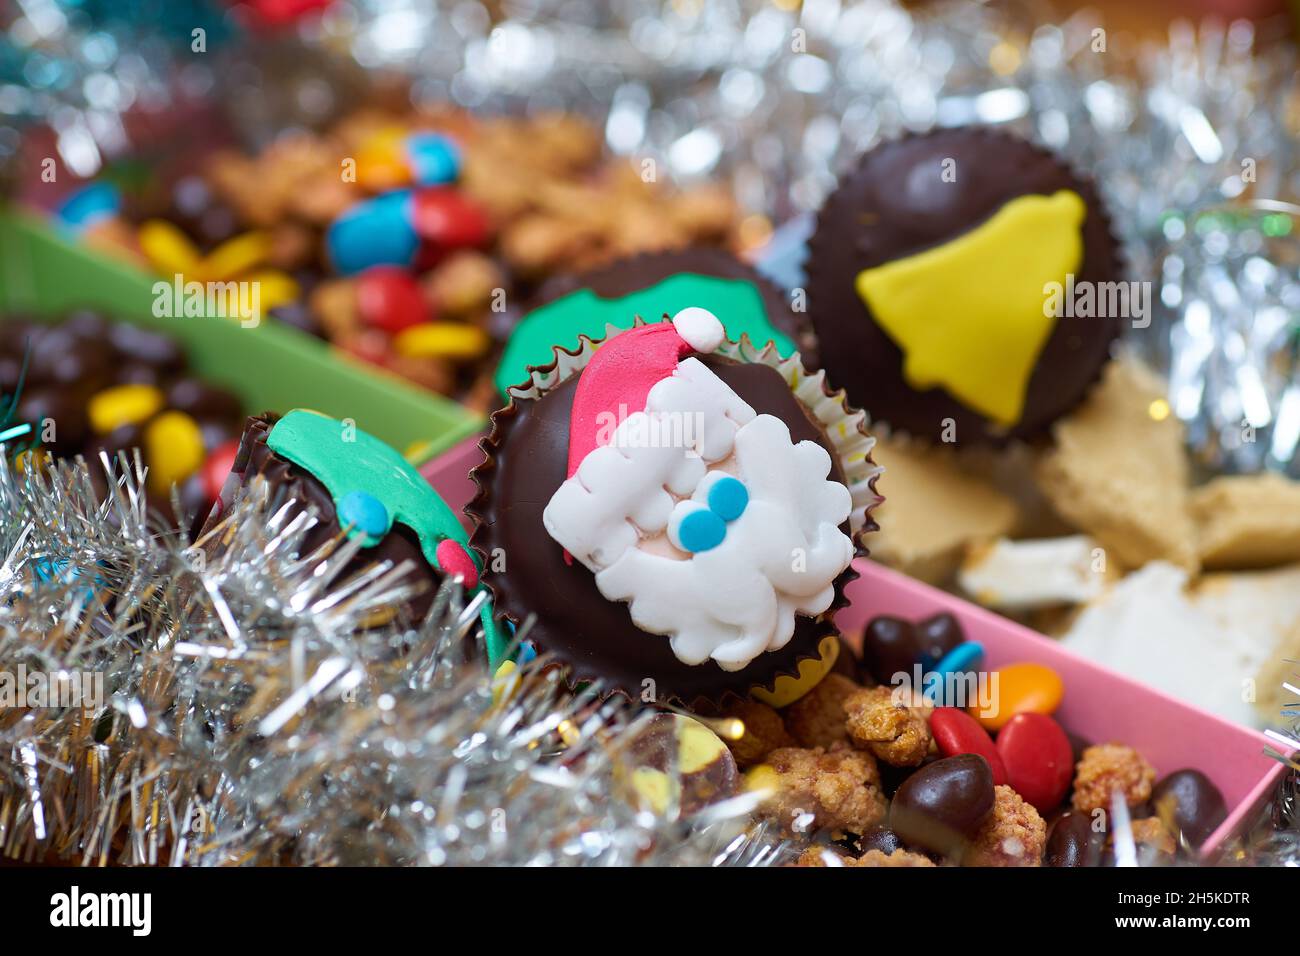 sweets with Christmas motifs Stock Photo